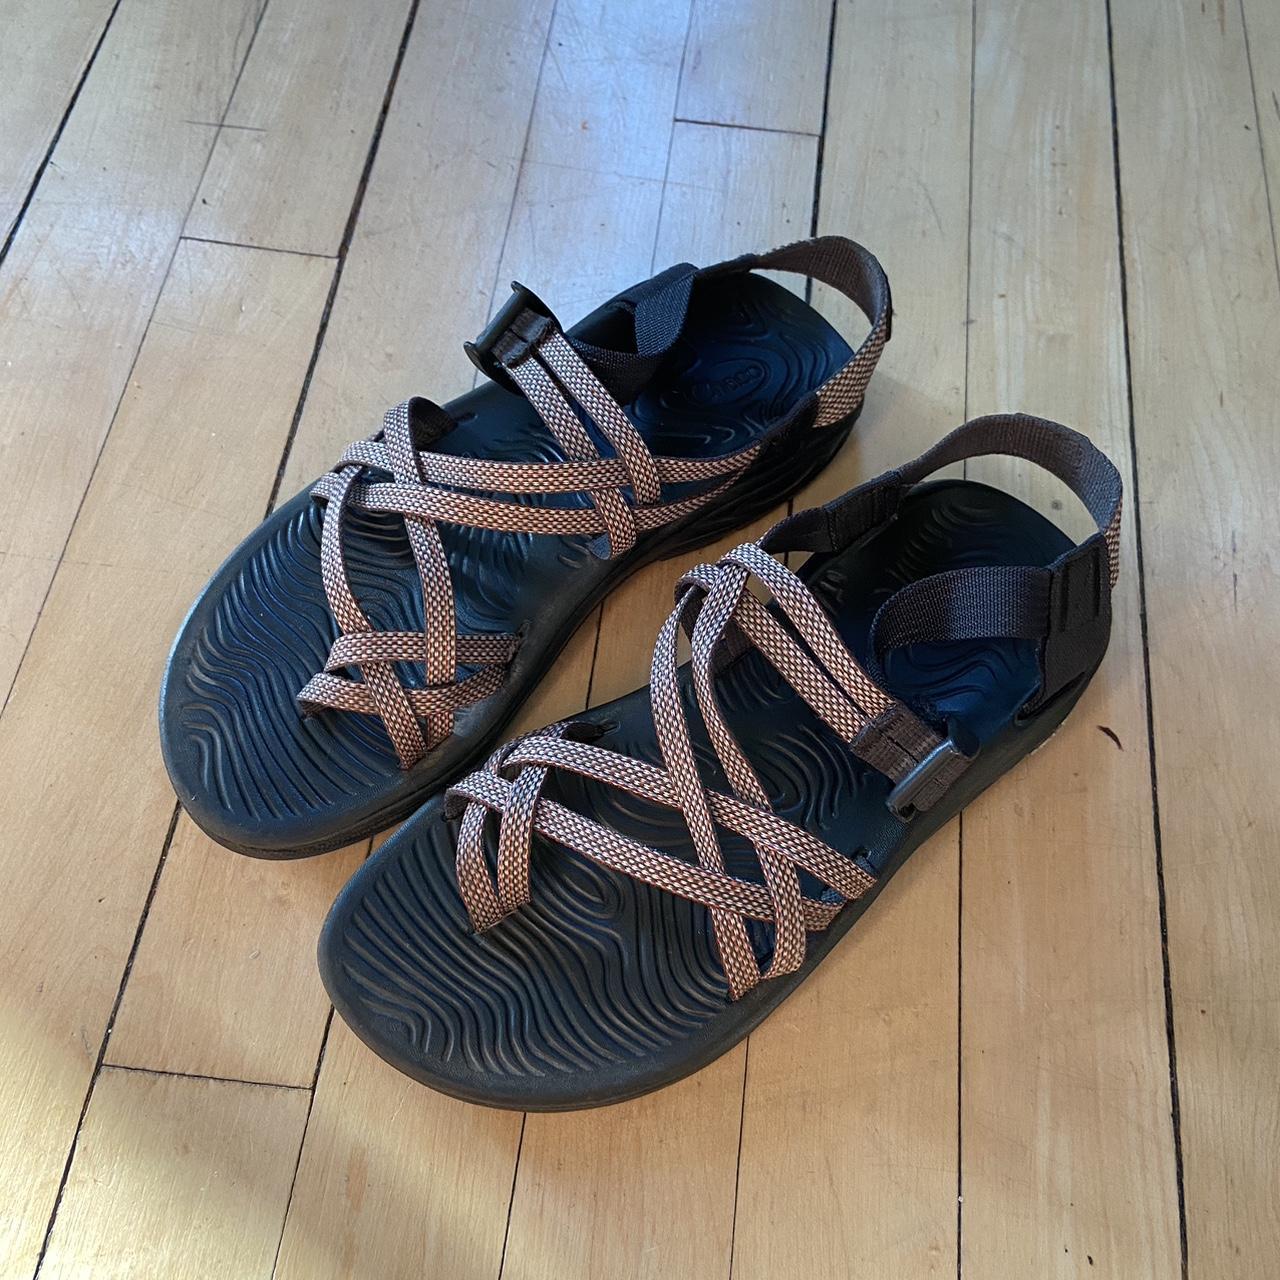 Hiker girl classic Chaco hiking sandals. These have... - Depop